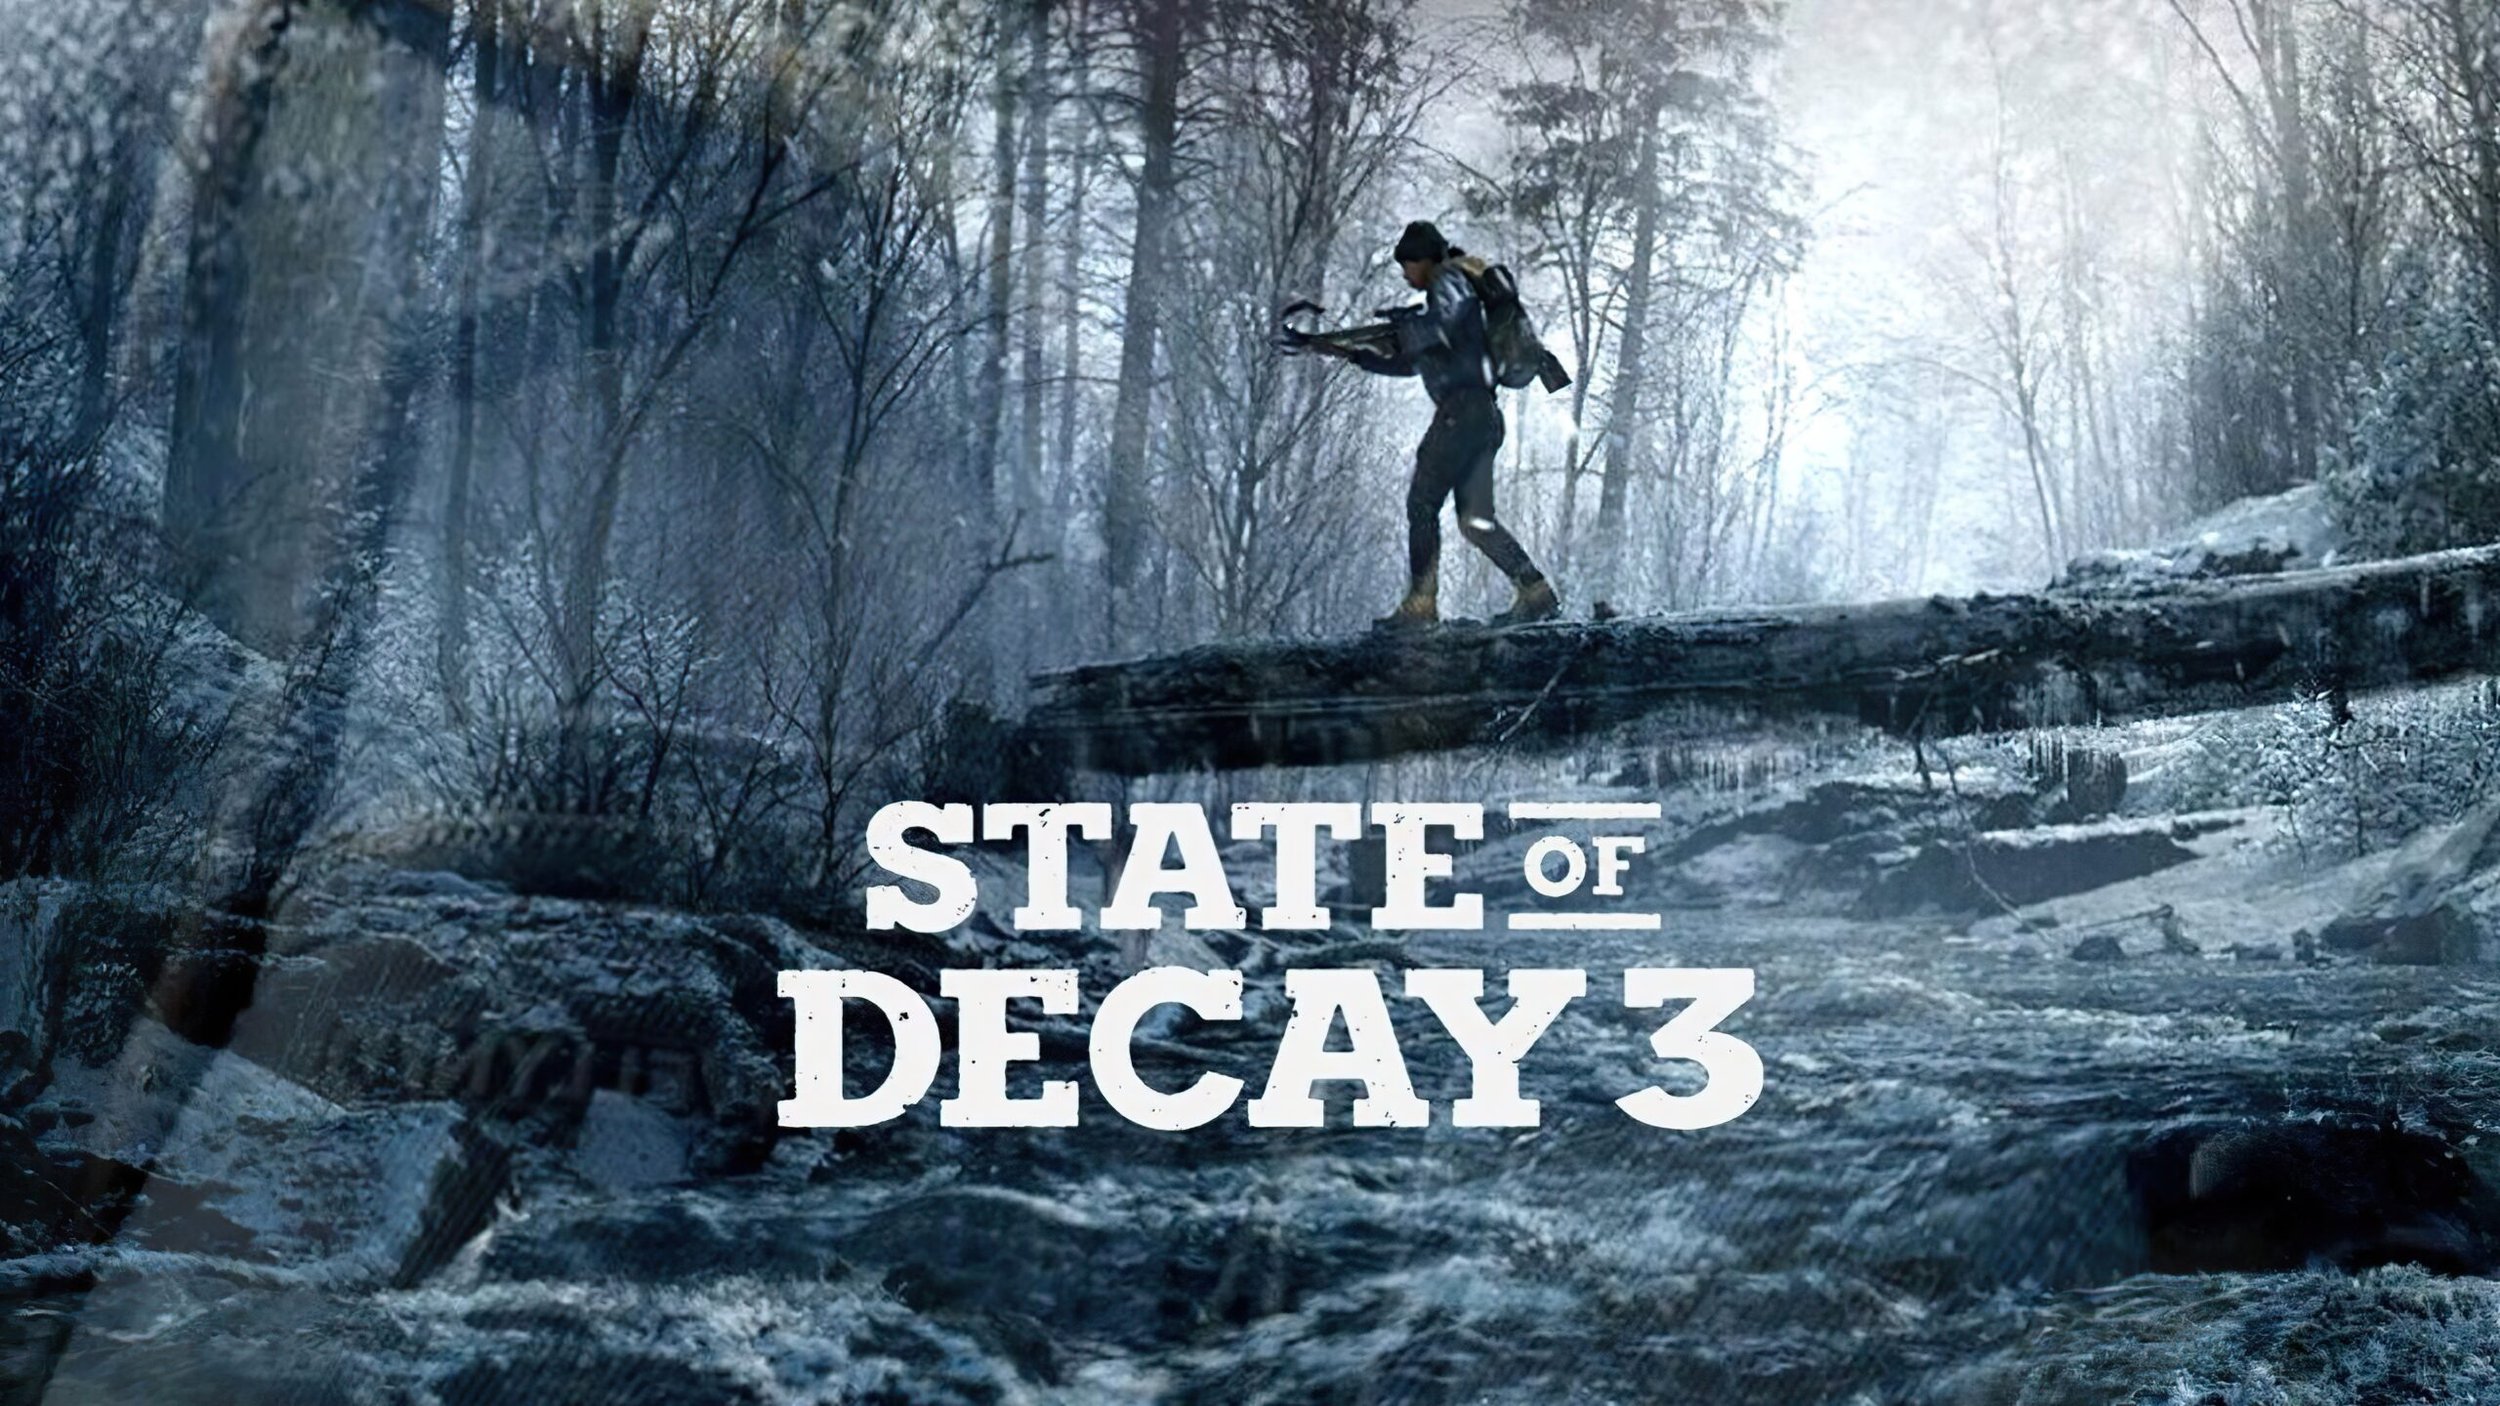 state-of-decay-3-HD-scaled.jpg